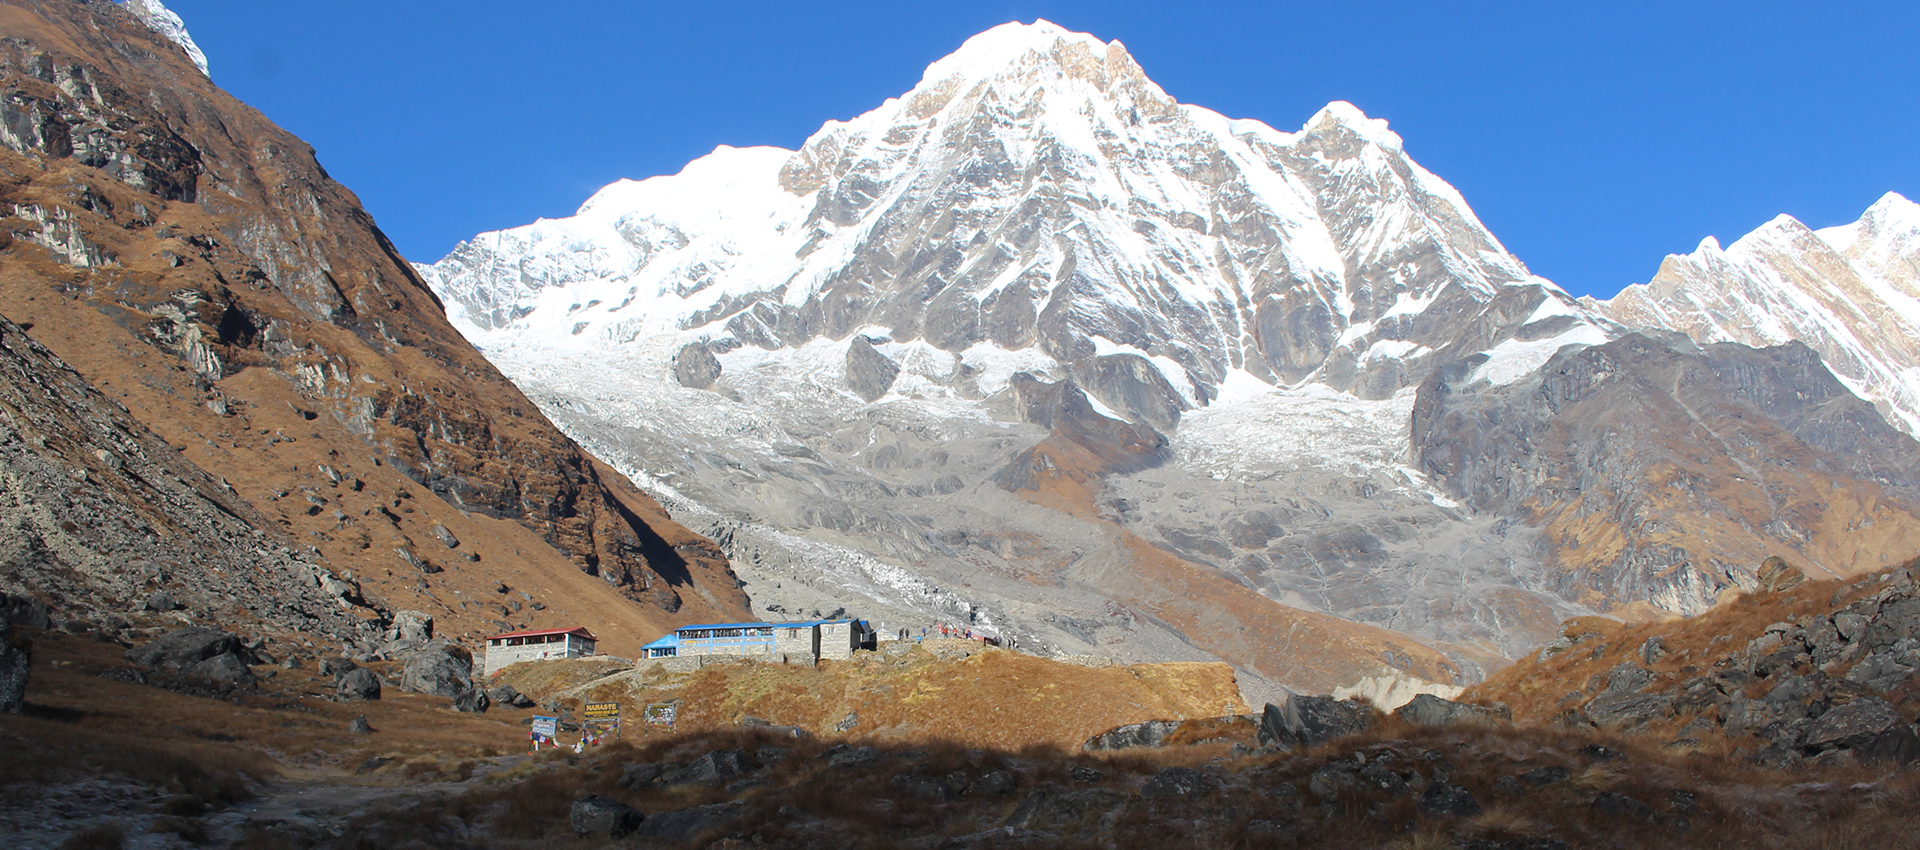 Annapurna Circuit Among 10 Must-Visit Destinations On Lonely Planet